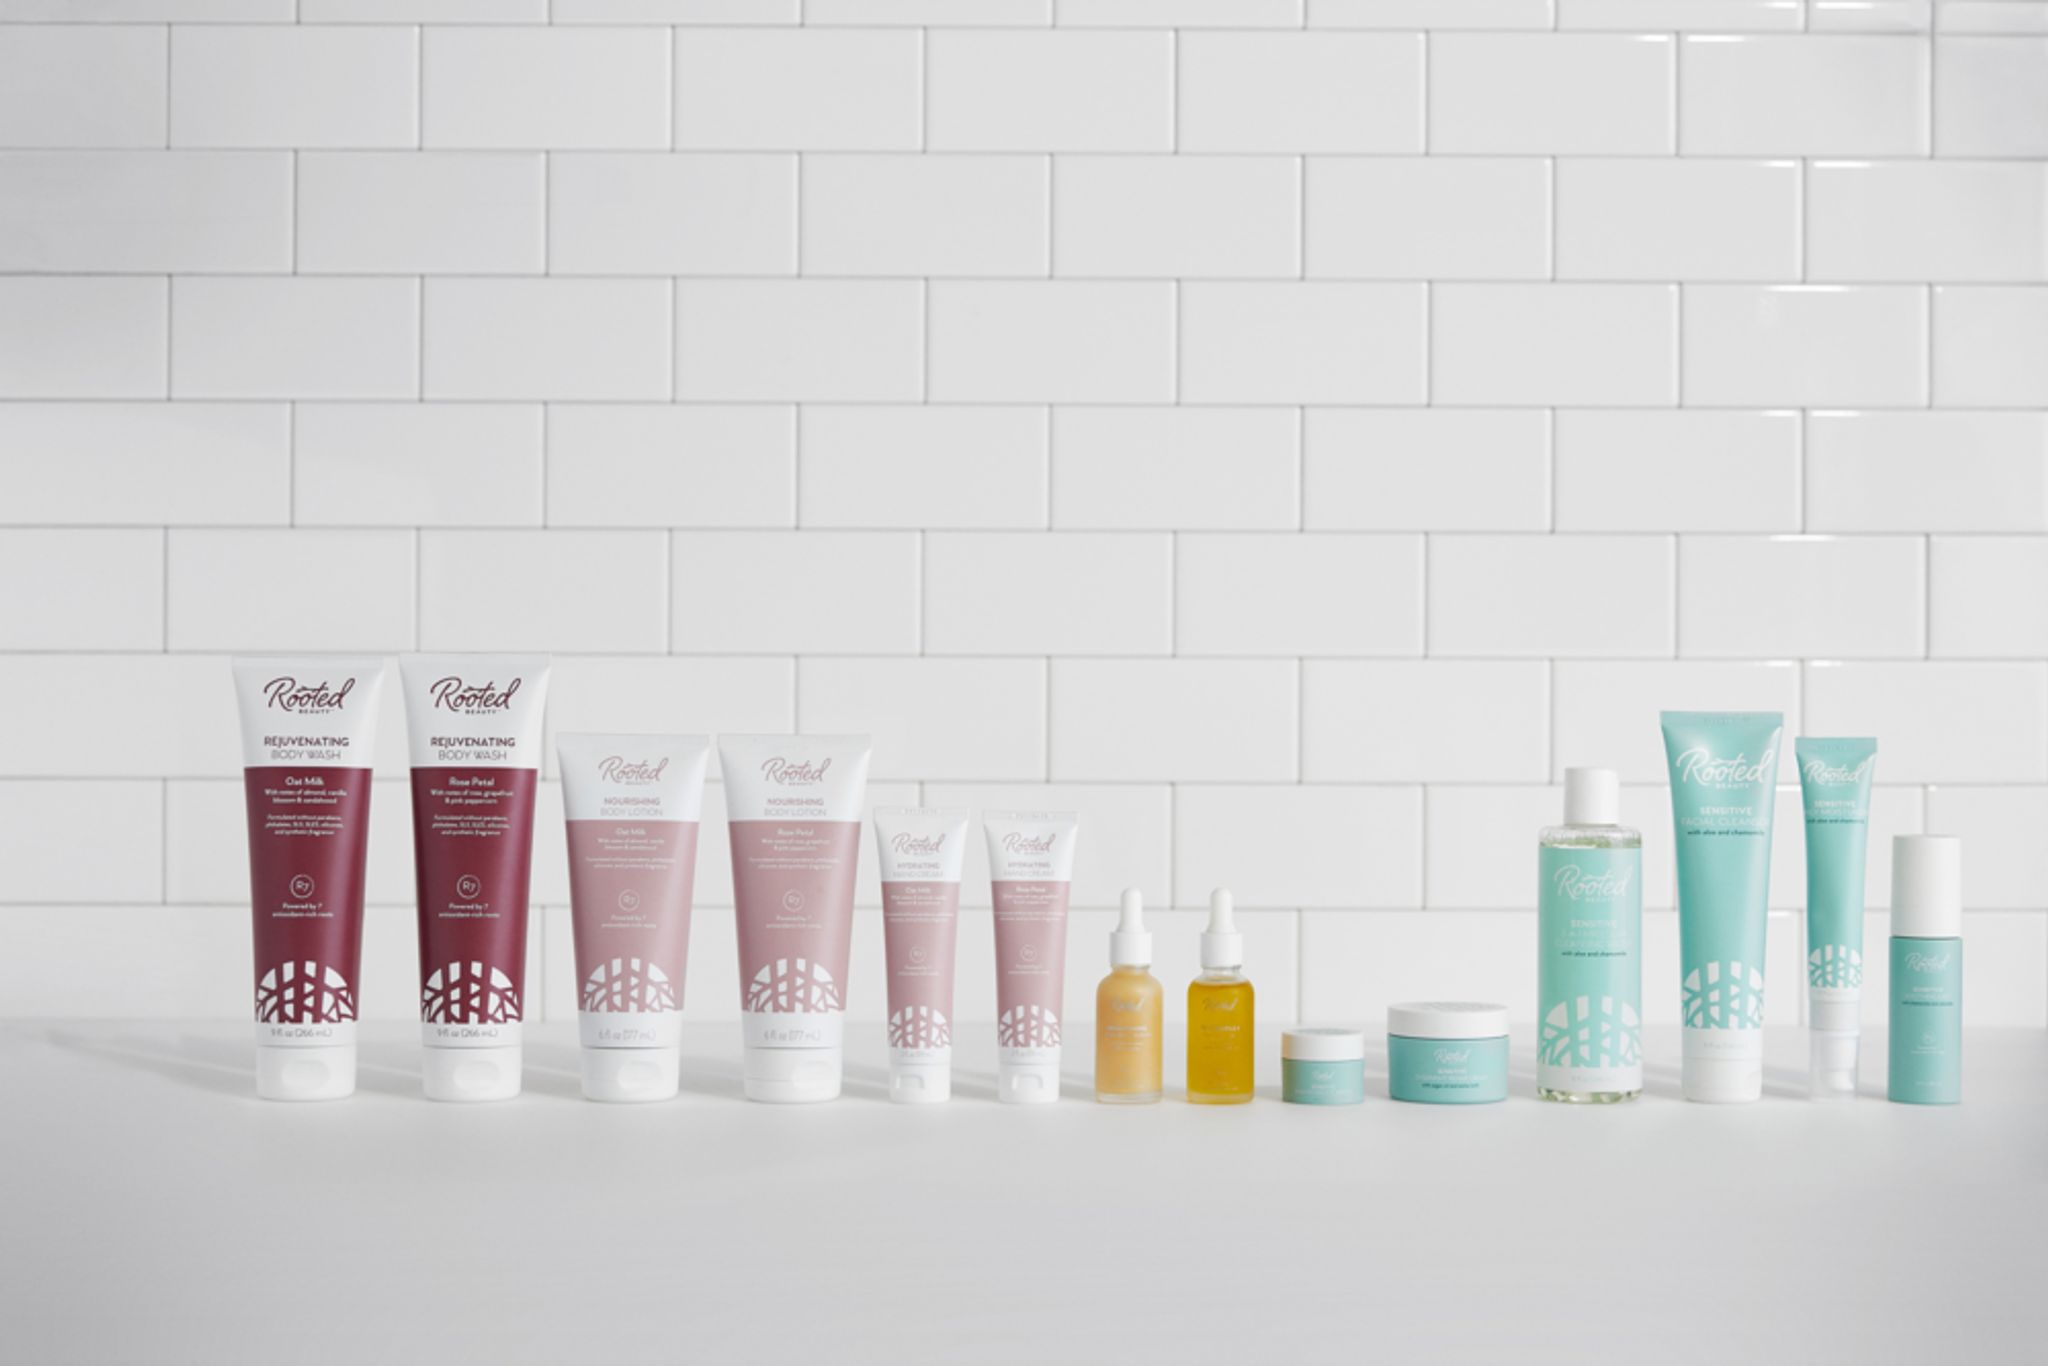 Image of rooted products with micellar water